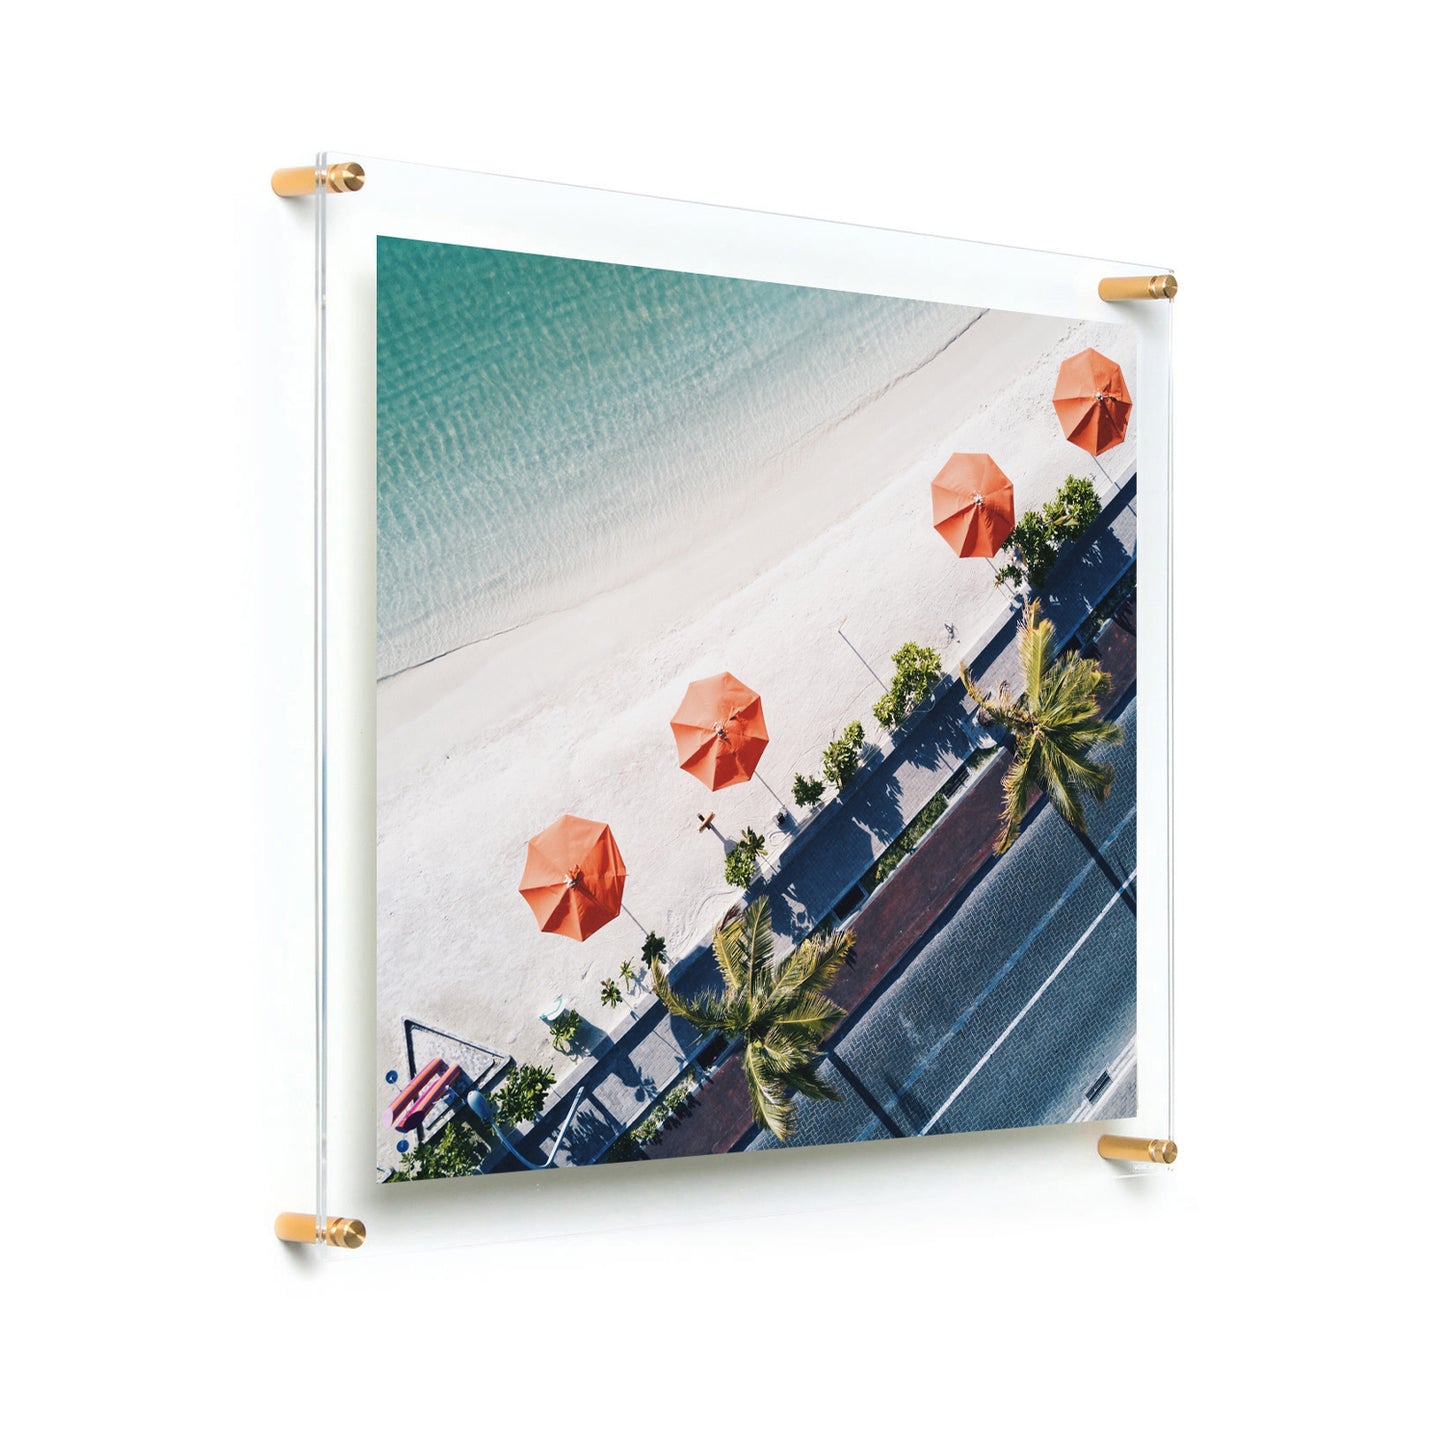 20x24" Photo Floating Acrylic Clear Picture Frame (Frame Size 23x27")